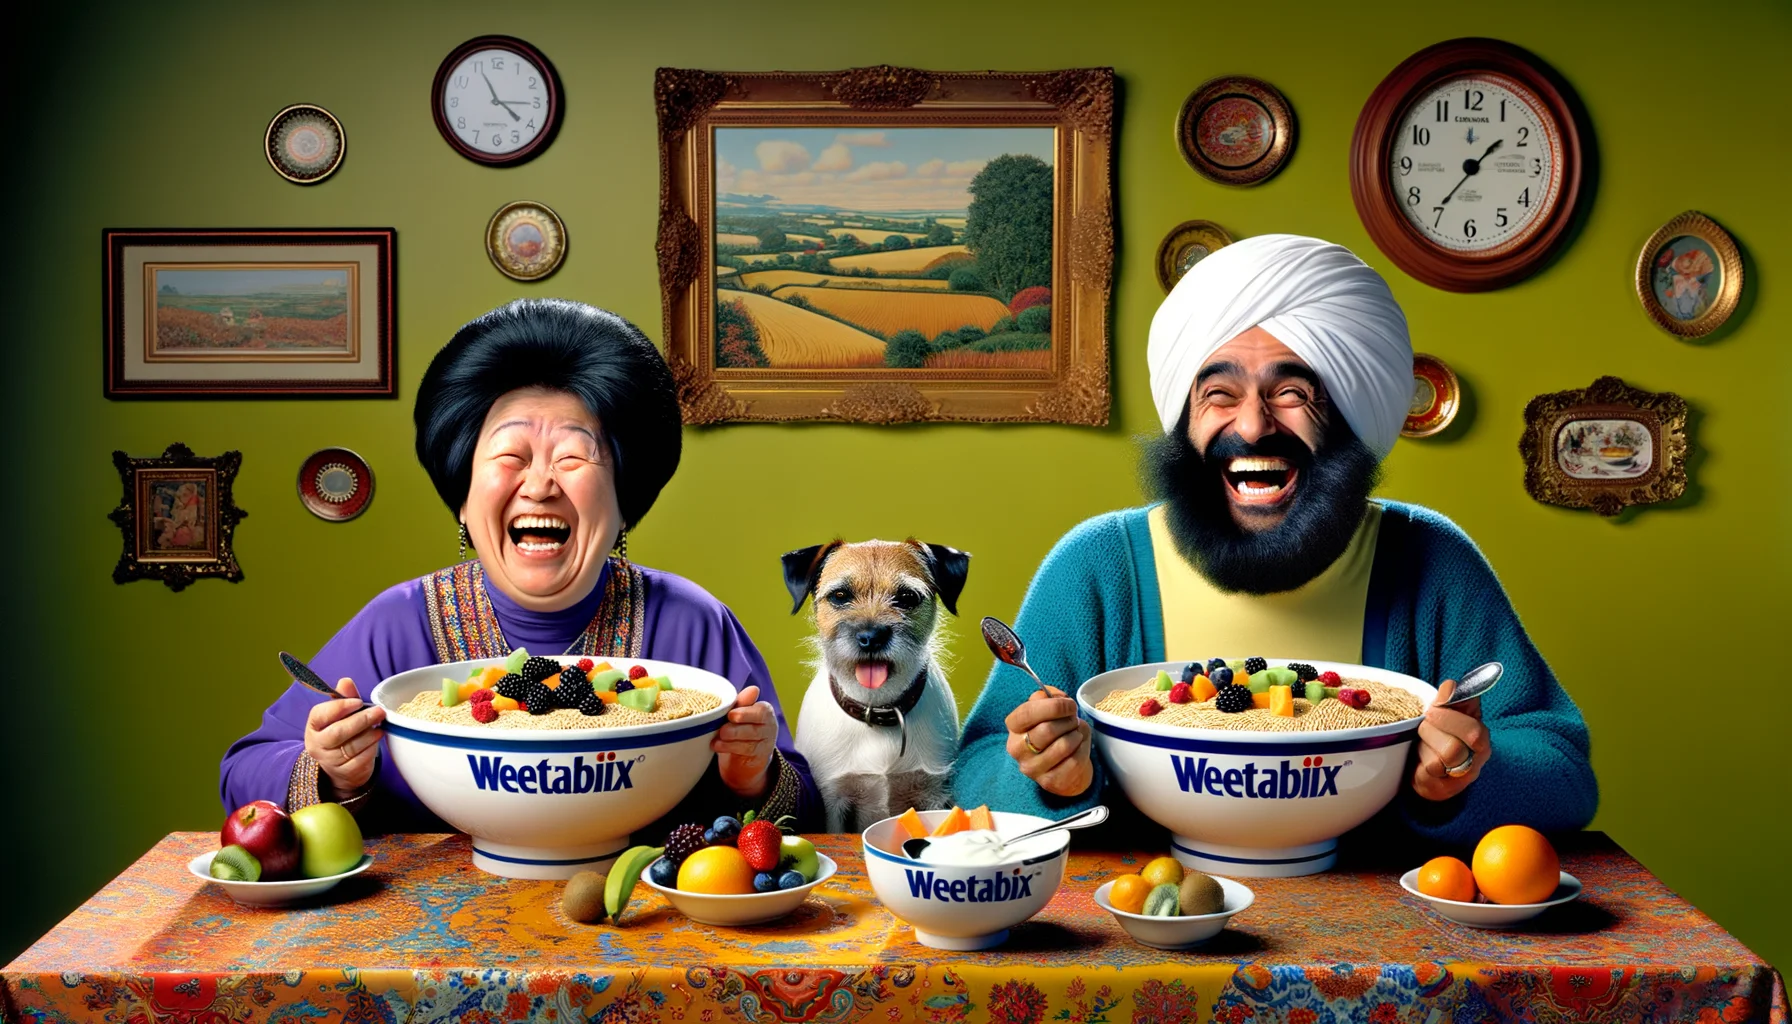 A humorous scene featuring an elderly South Asian woman and a Middle-Eastern man sitting at a vividly decorated dining table, laughter etched on their faces. In front of them are overly sizable bowls filled up to the brim with Weetabix and smaller bowls filled with fruits and yogurt on the side. They are wearing sweat bands and workout clothes, suggesting they've just finished a fitness regime. In the background, a border terrier dog is curiously trying to reach the table to get a bite. Caption at the bottom reads, 'Weetabix: The secret diet for the lively and young at heart!'.